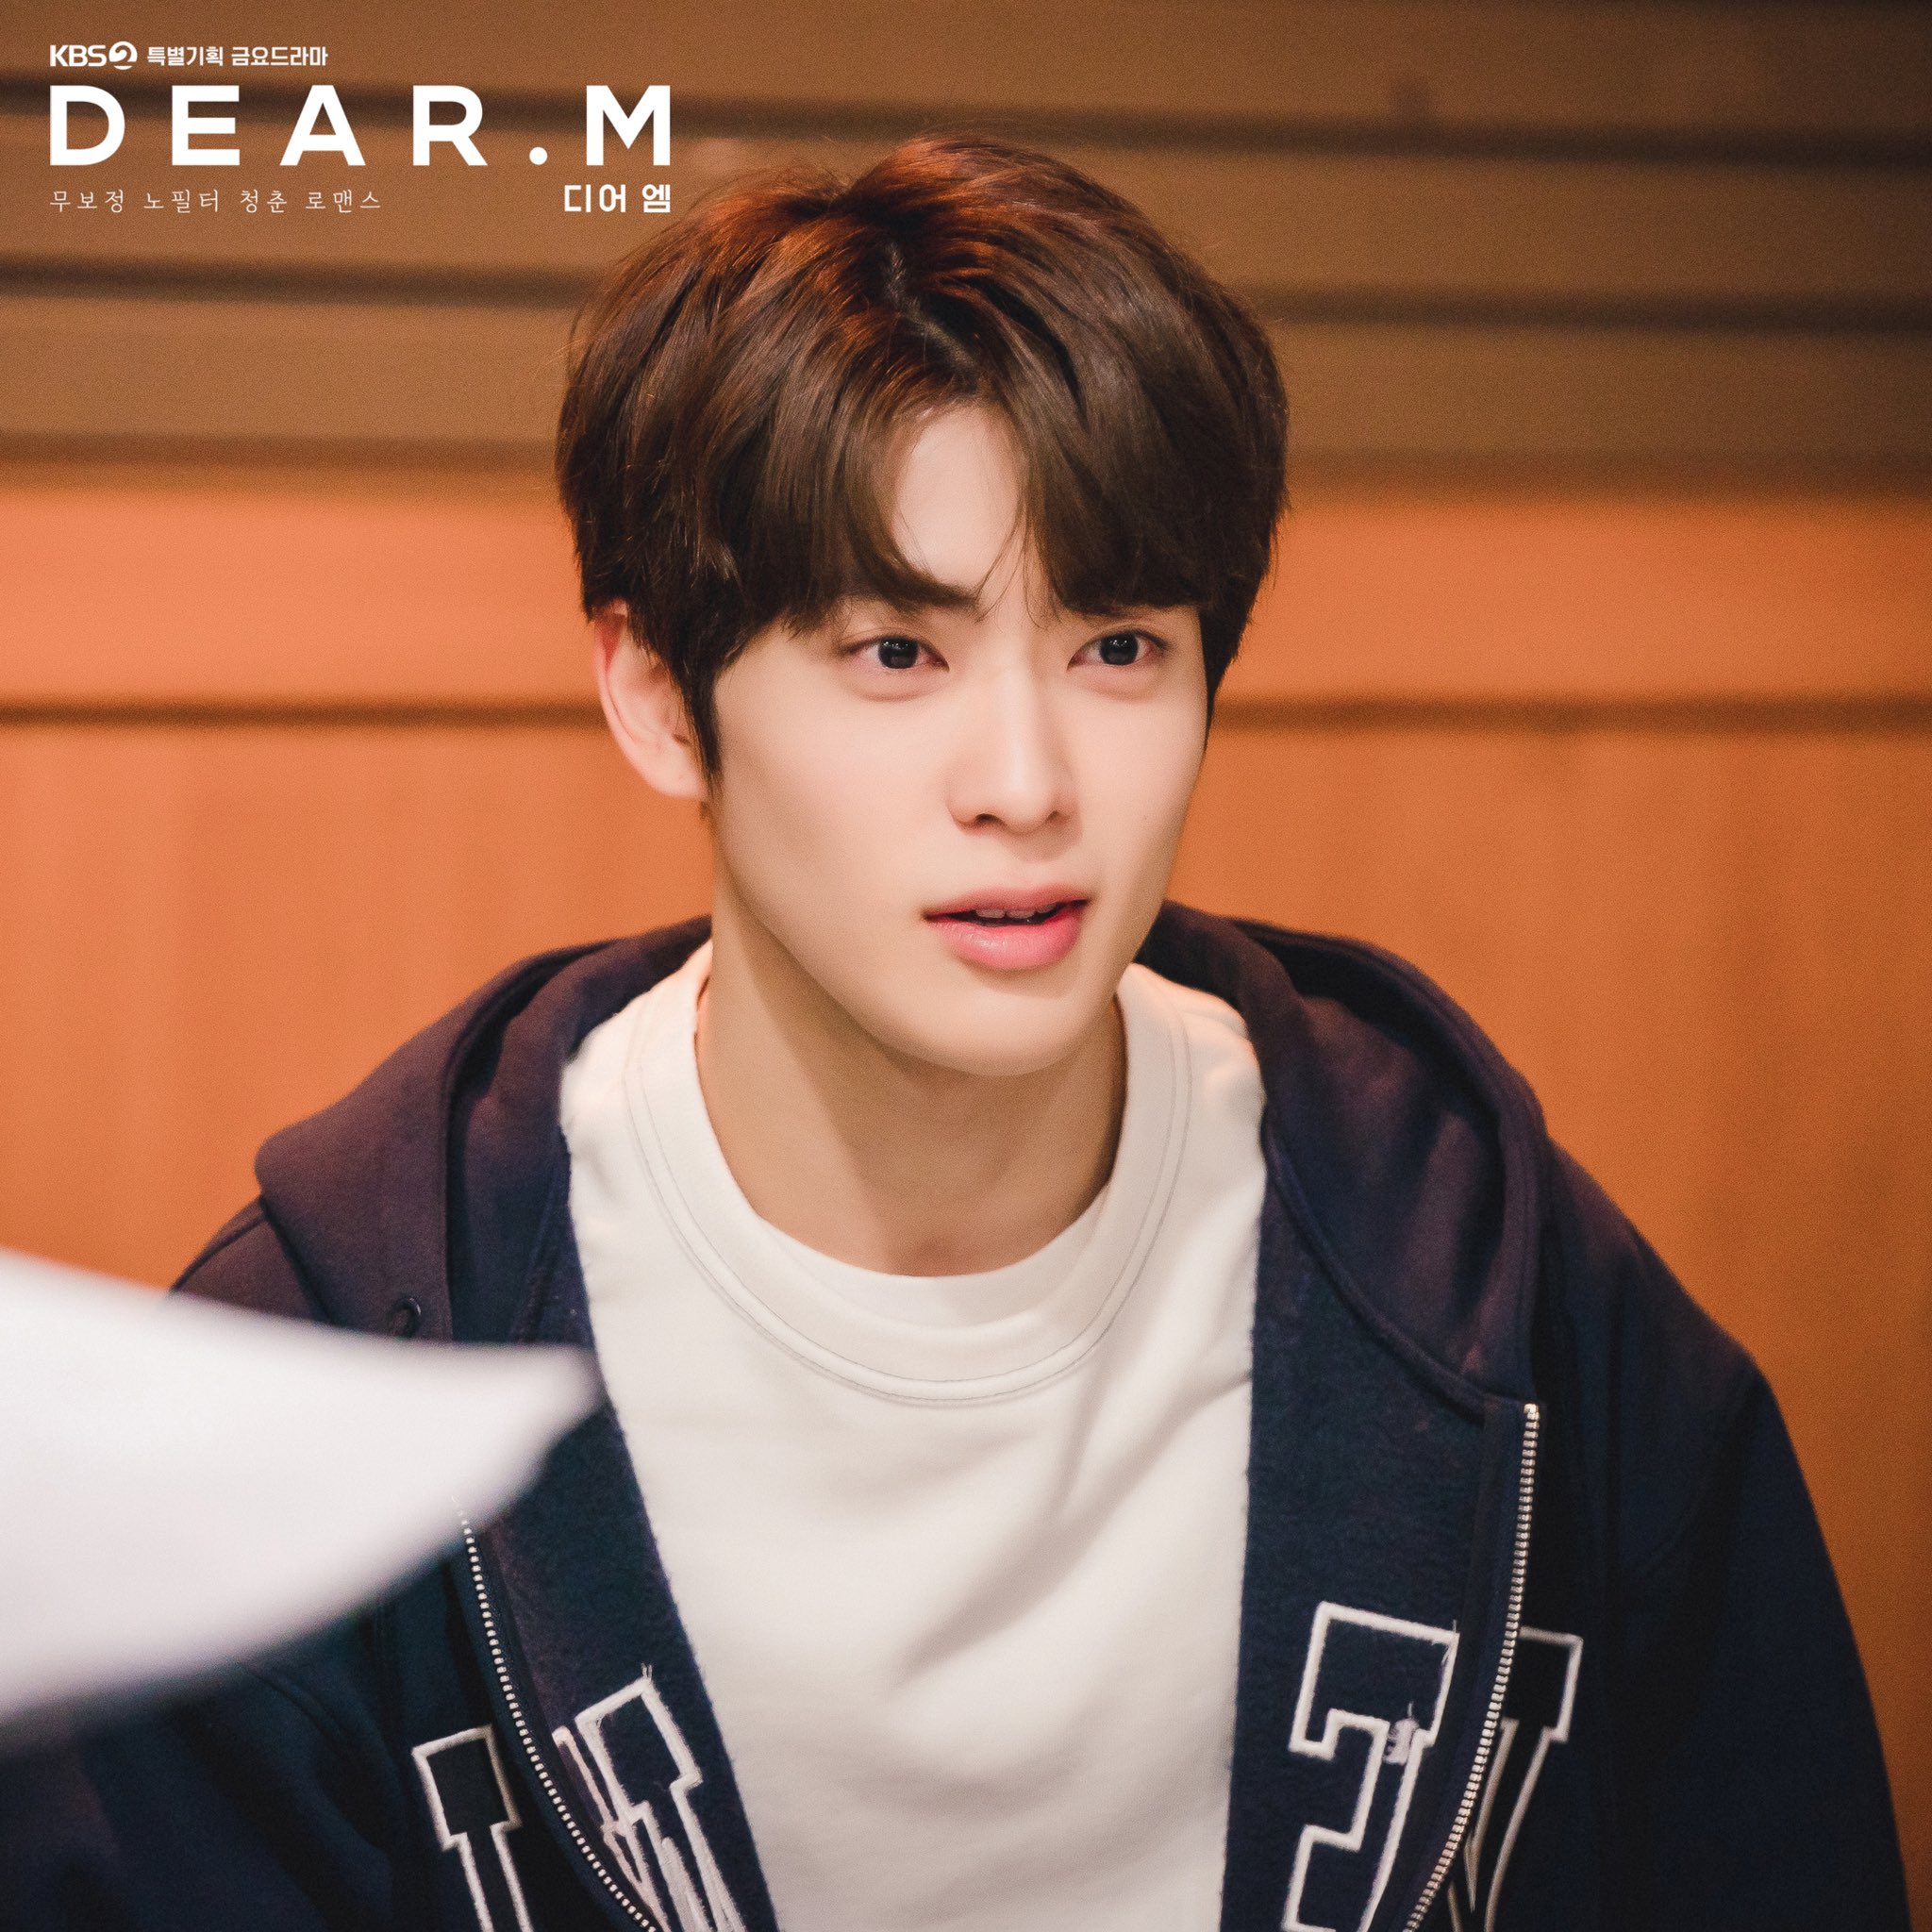 kbs-releases-new-photos-of-nct-jaehyun-in-upcoming-drama-dear-m